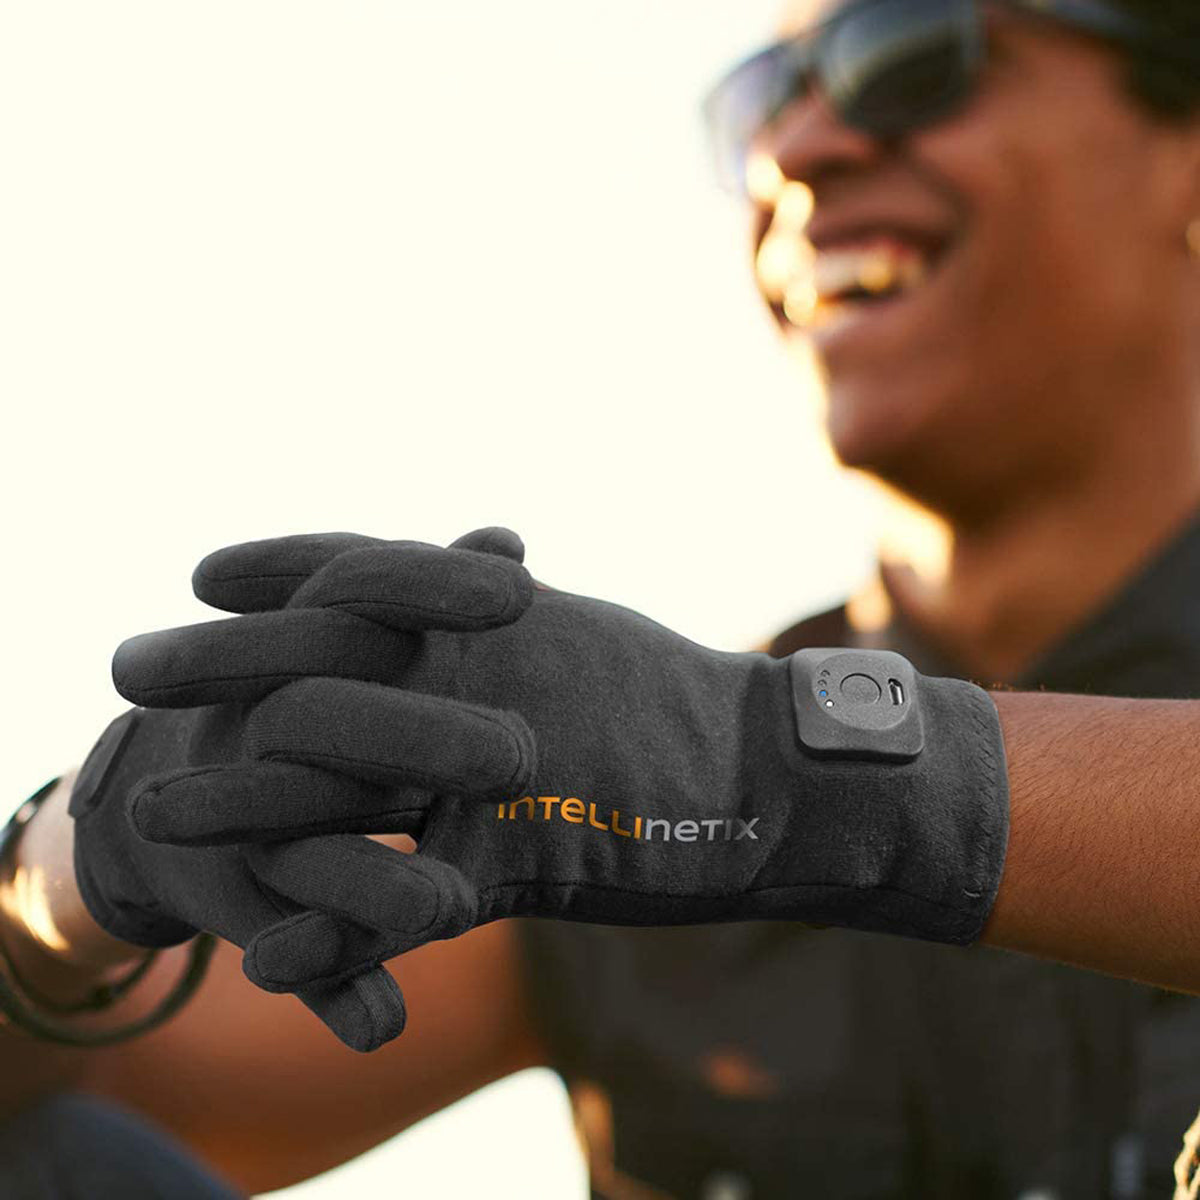 Intellinetix Vibrating Therapy Gloves - Increases circulation and reduces pain Intellinetix